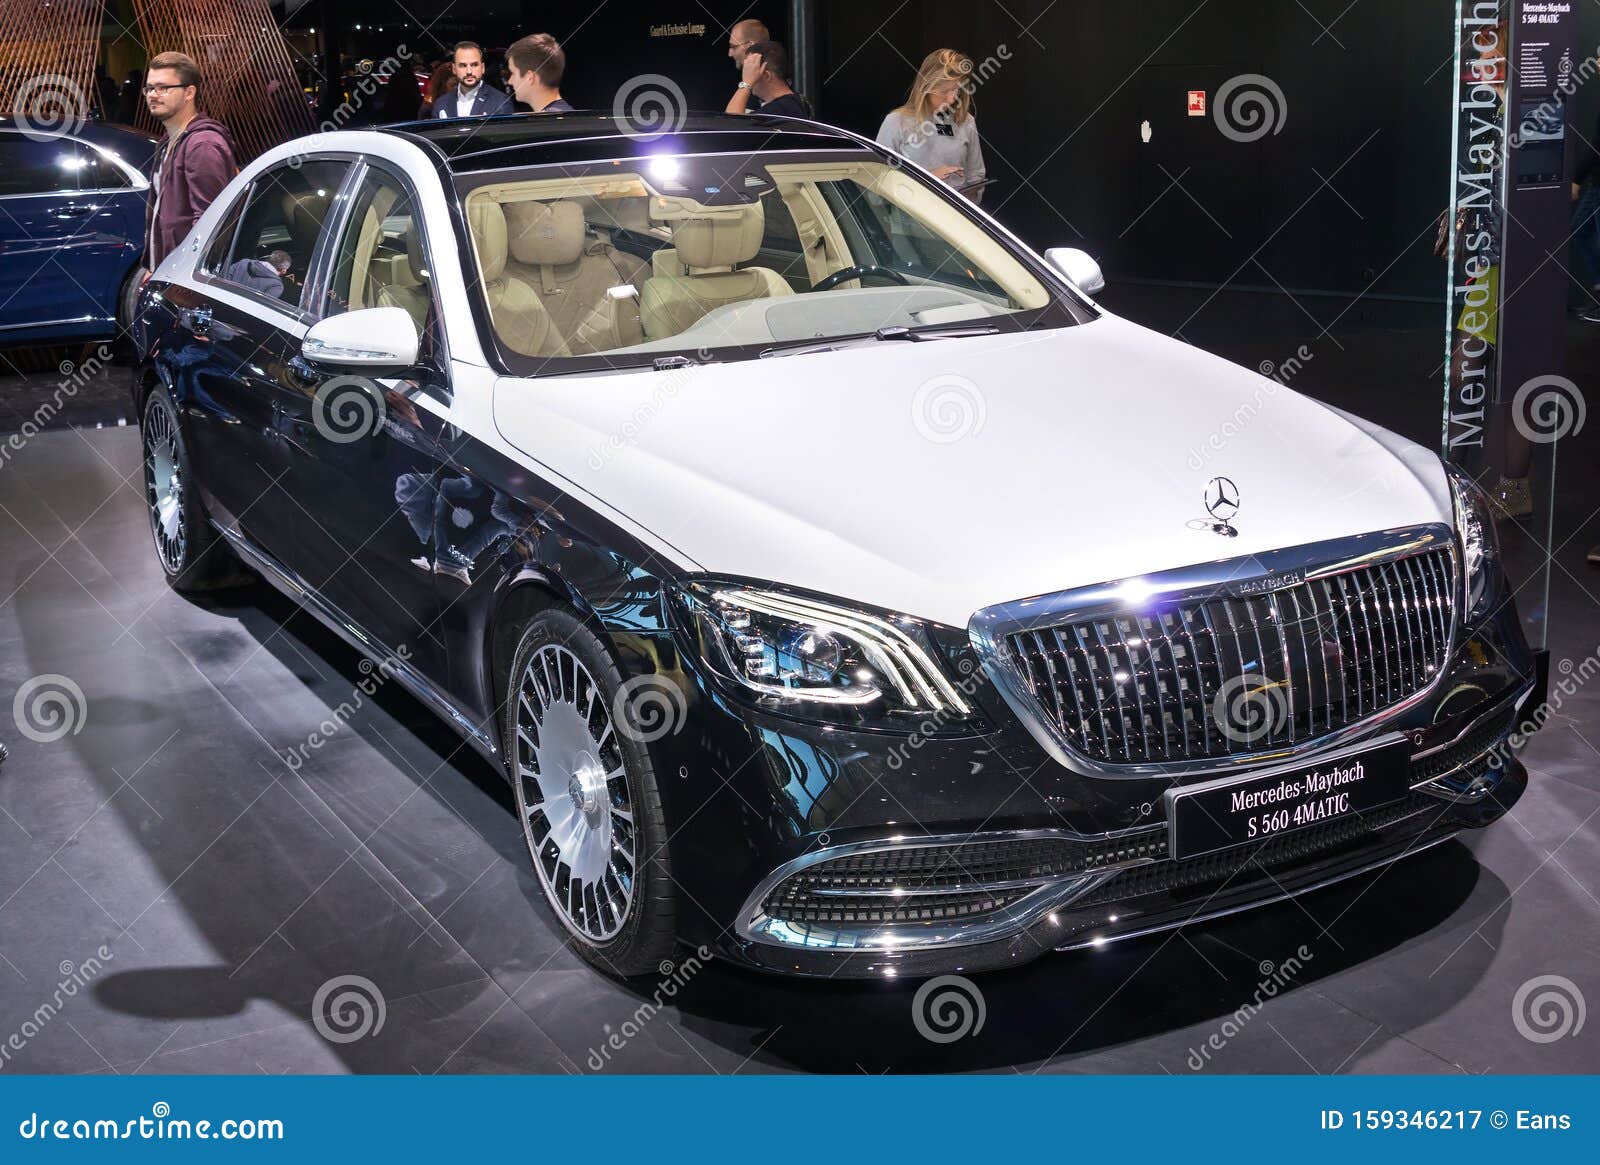 Maybach Mercedes: Over 1,954 Royalty-Free Licensable Stock Photos